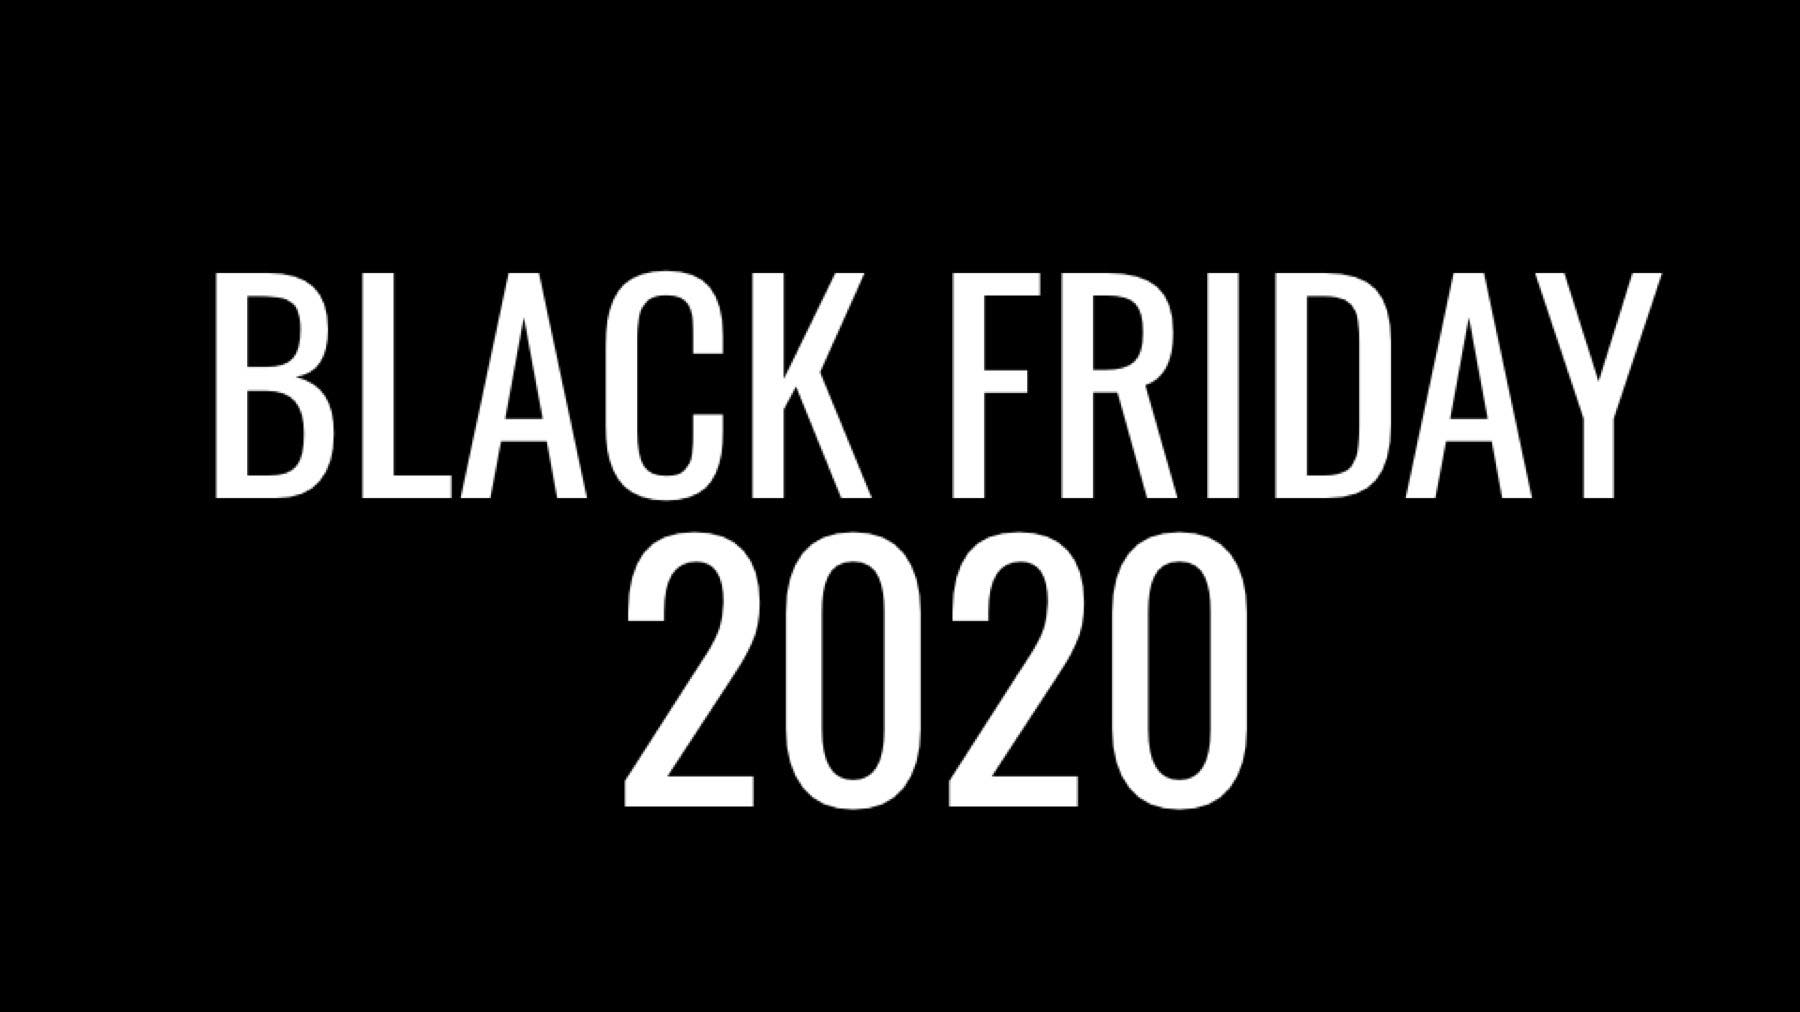 Roundup Of Deals For Black Friday 2020 - The Freebie Guy® - Will Pelican Have A Black Friday Deal